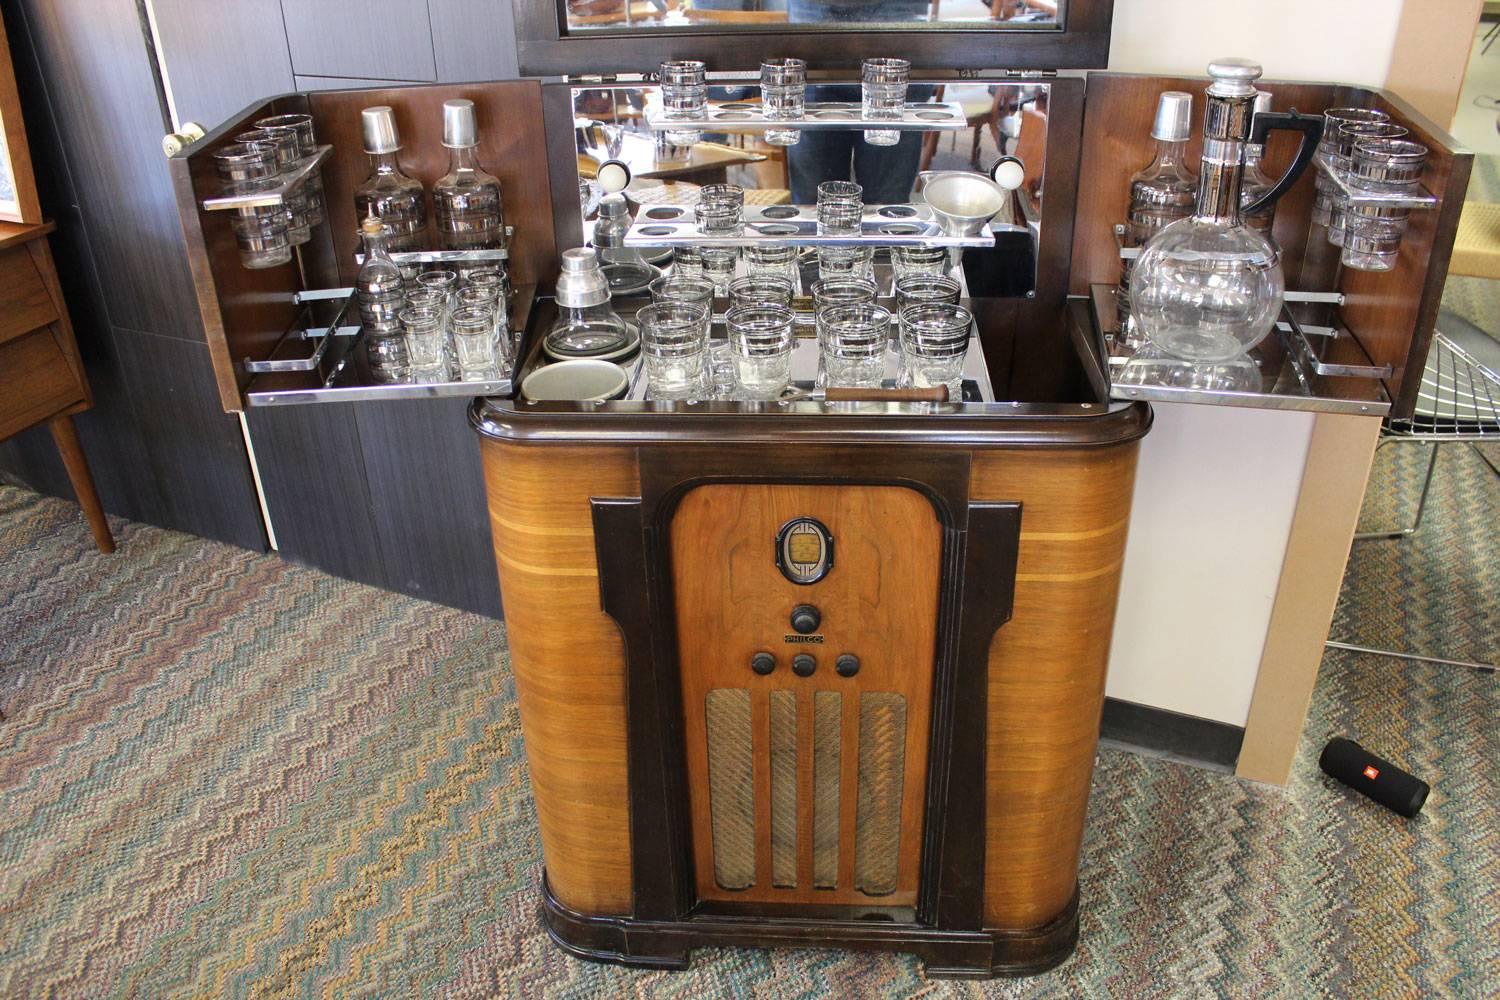 Rare Philco bar cabinet with built-in radio. Barware includes original Dorothy Thorpe glassware. Radio and two-lite bulbs are in working condition. Swing in or swing out bar shelves are in perfect working condition. Wood is believed to be walnut and